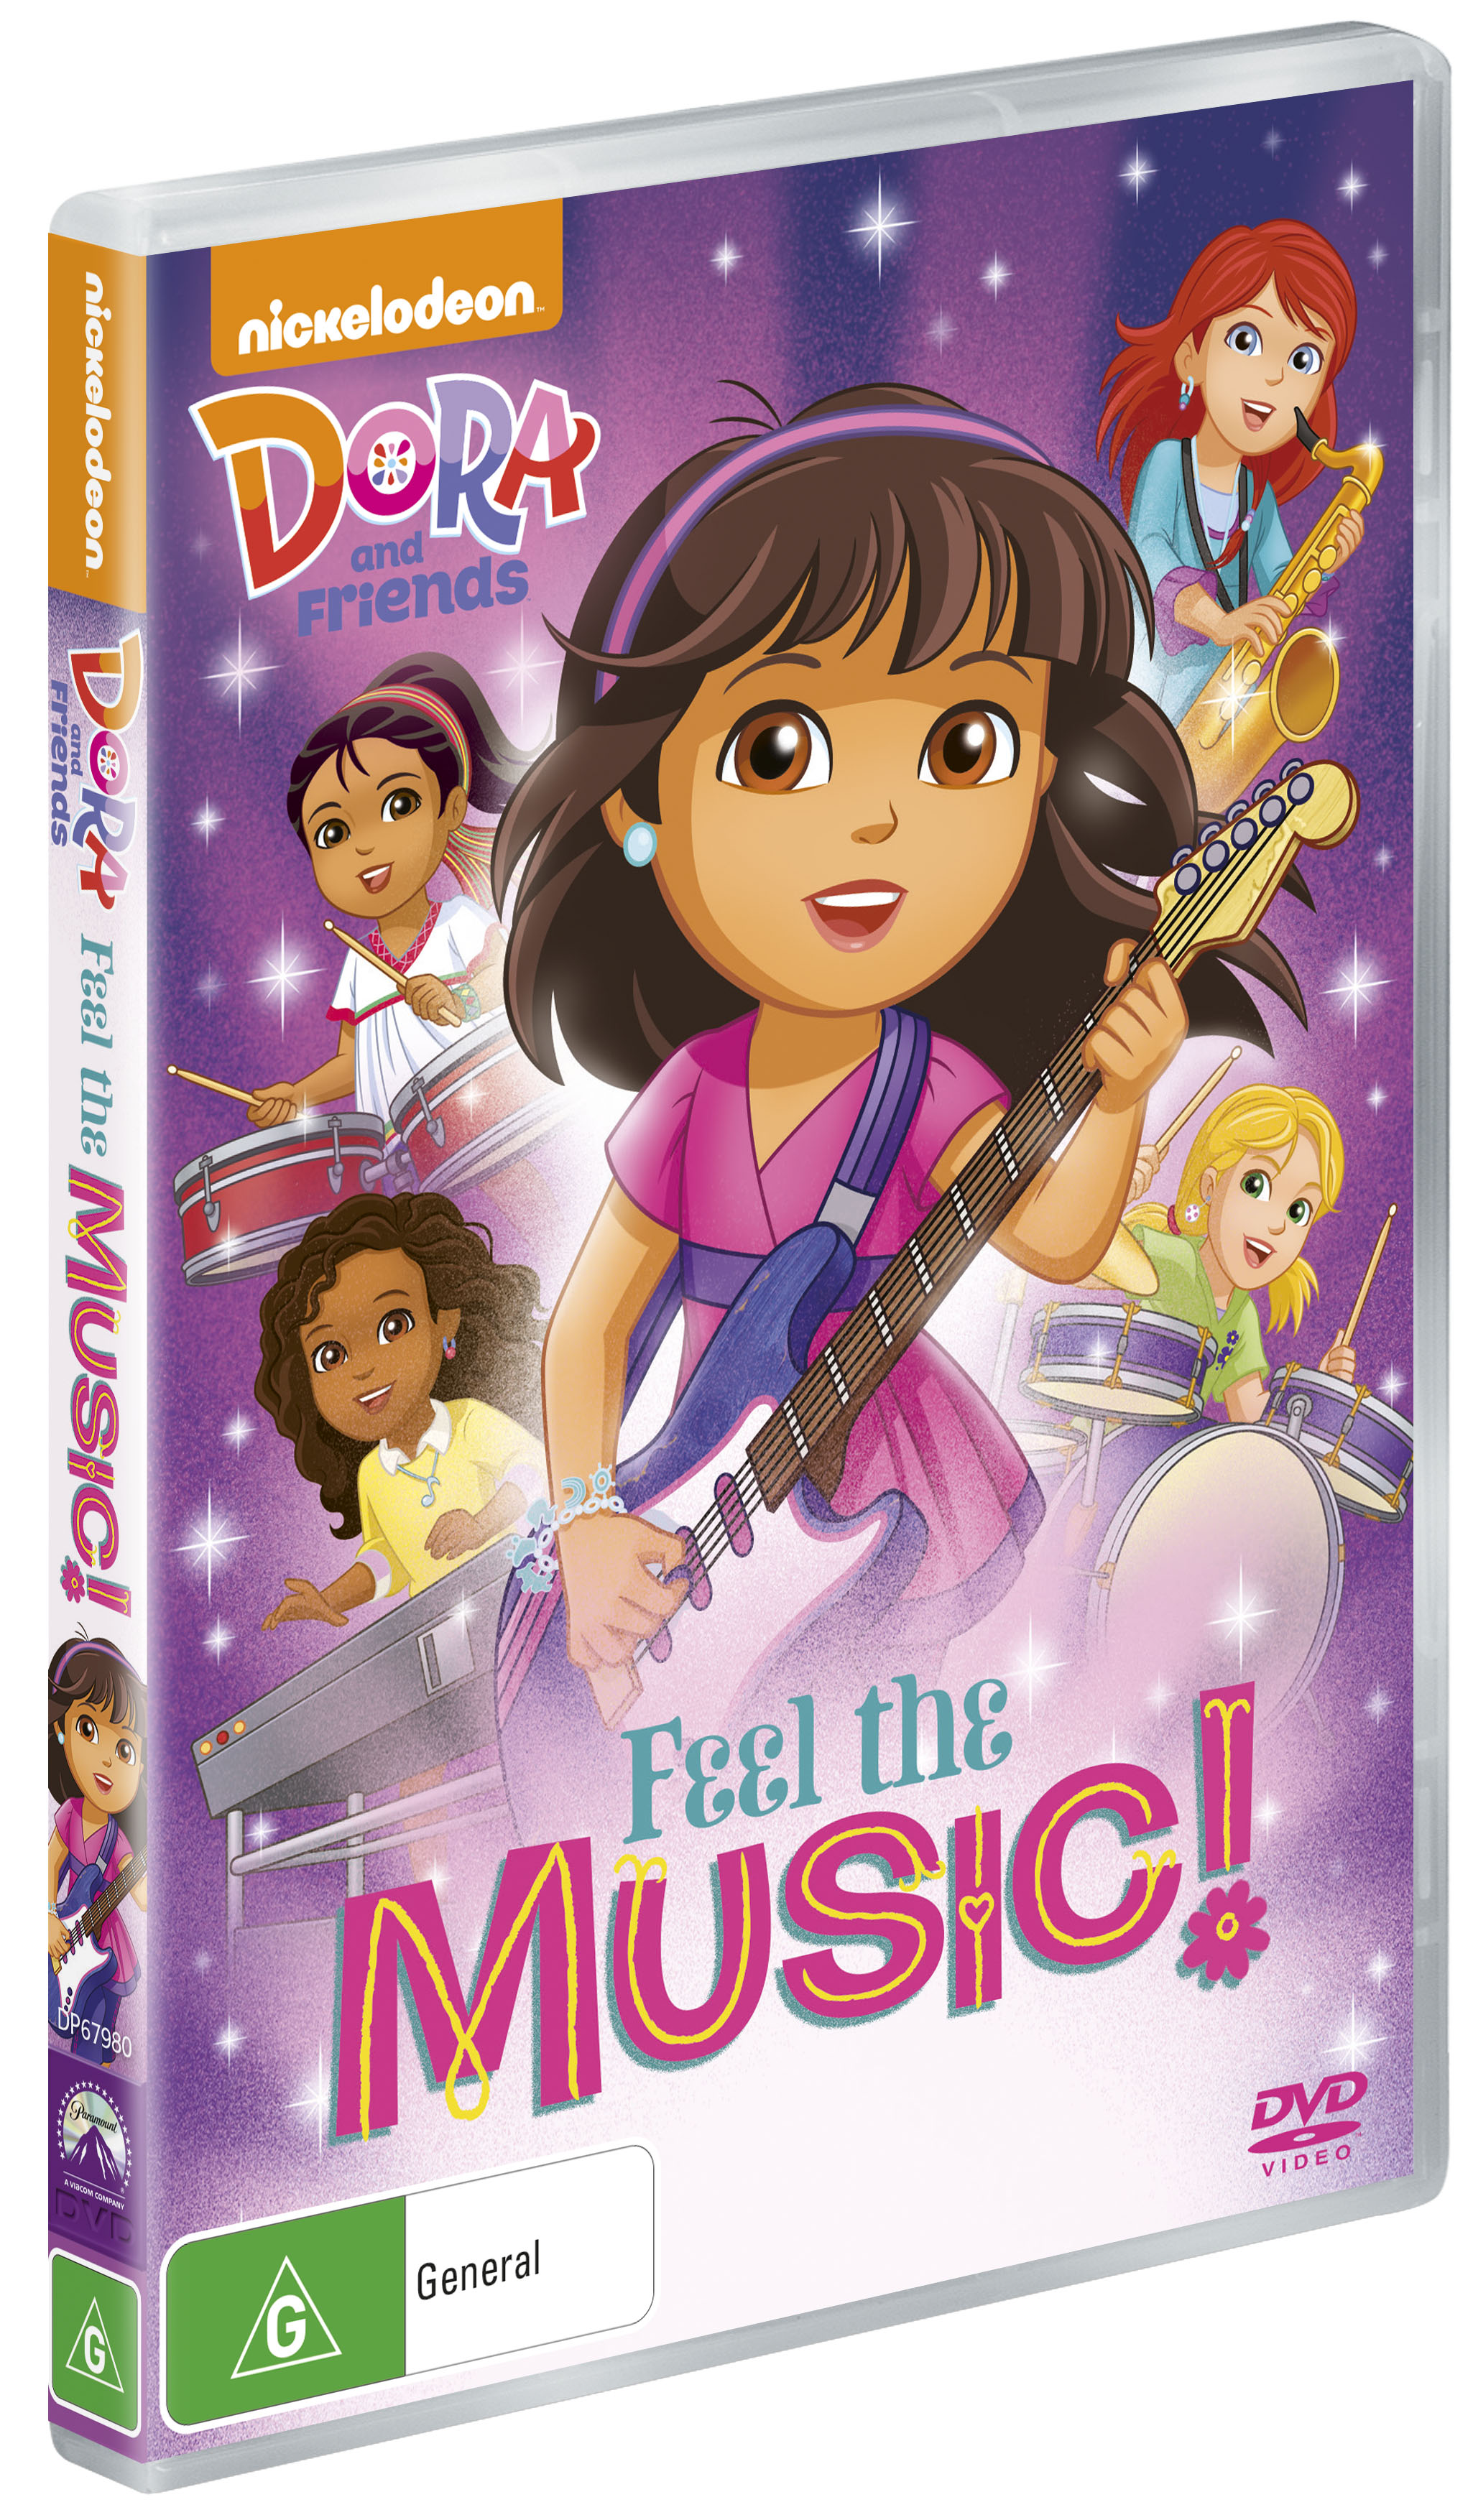 Win 1 prize pack from Dora and Friends Giveaway.